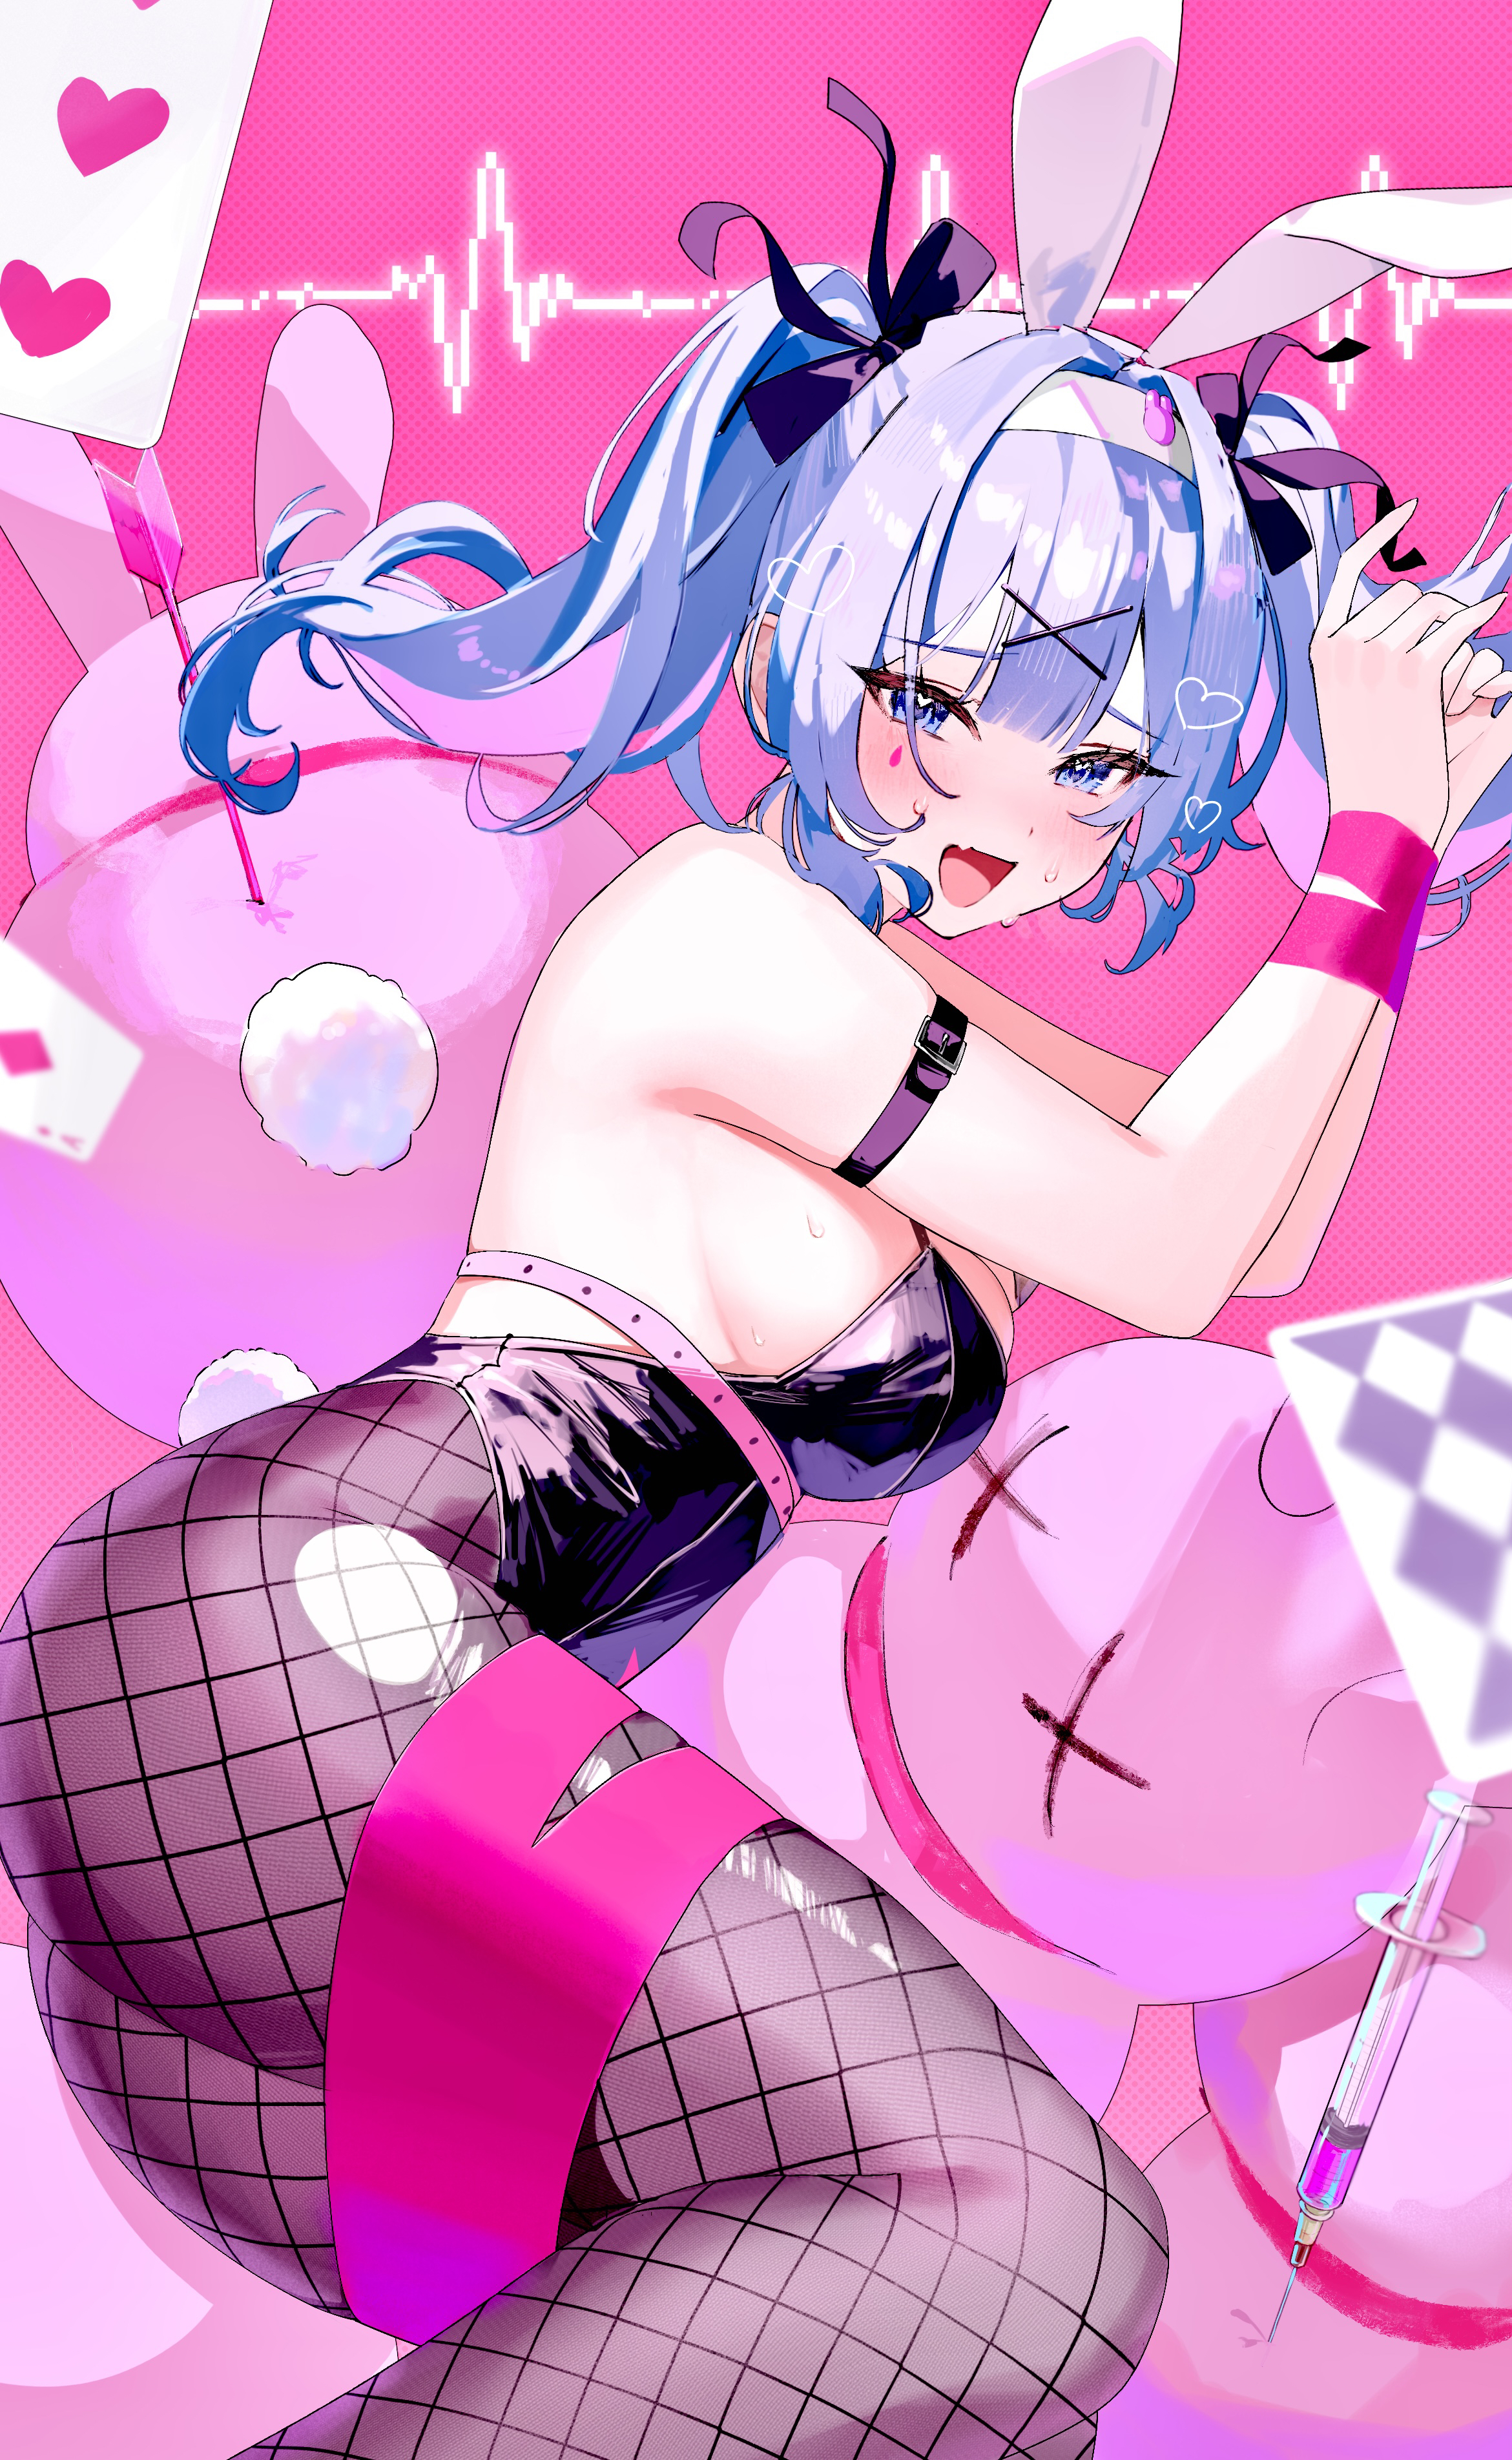 Anime 2341x3808 anime anime girls Vocaloid Hatsune Miku blue hair blue eyes animal ears bunny ears tail bunny tail pink background cards open mouth twintails simple background blushing fishnet bound wrists arrows portrait display syringe chest harness